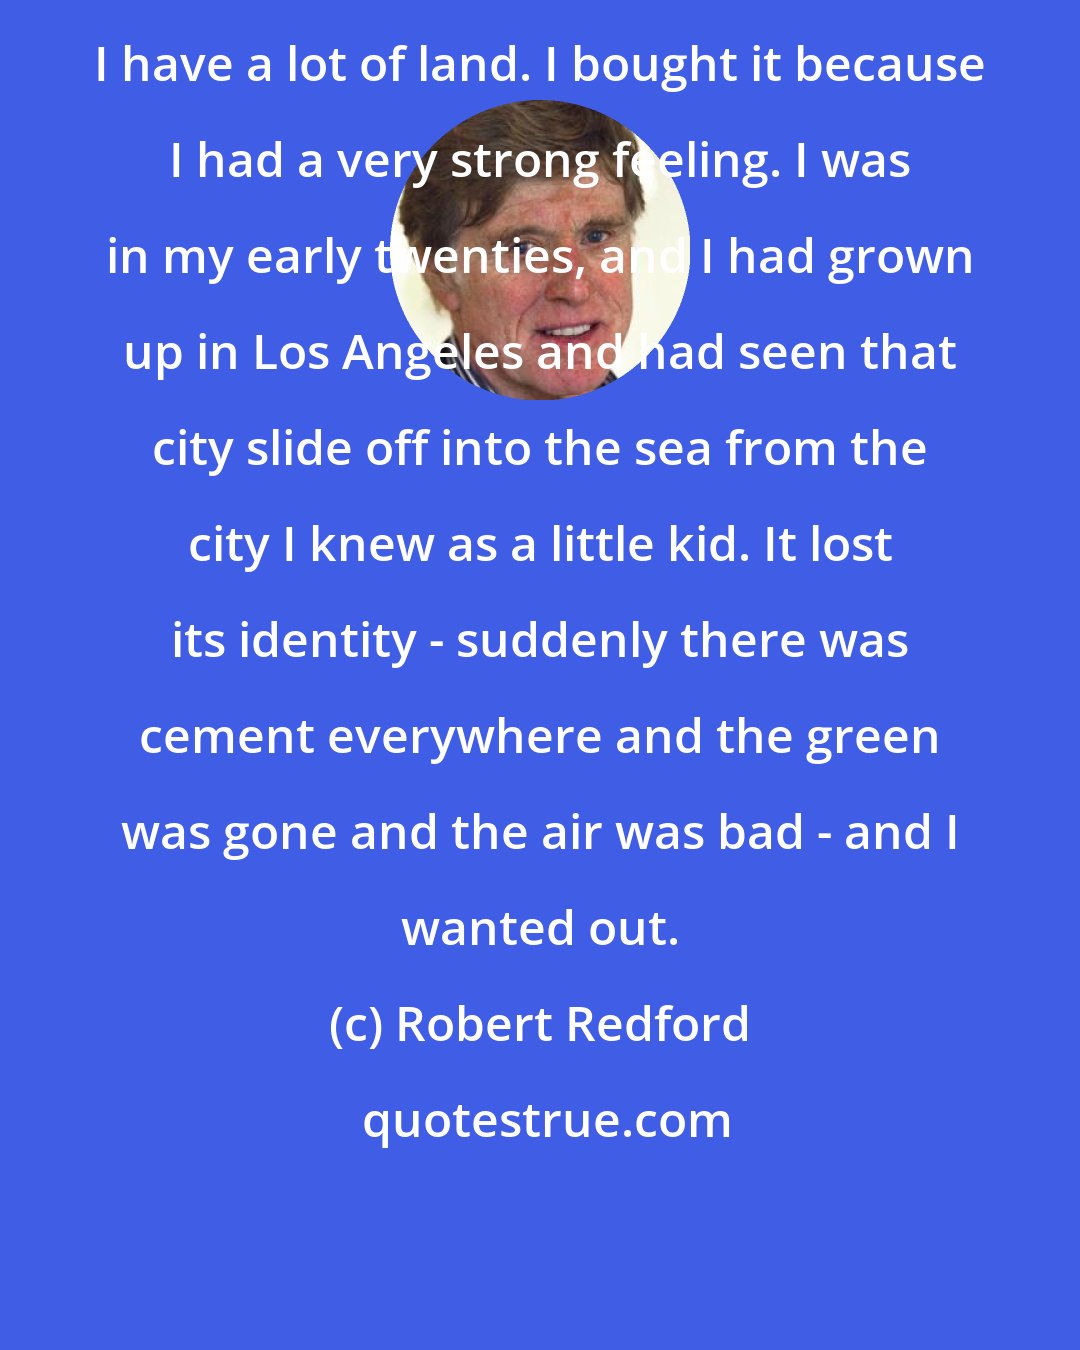 Robert Redford: I have a lot of land. I bought it because I had a very strong feeling. I was in my early twenties, and I had grown up in Los Angeles and had seen that city slide off into the sea from the city I knew as a little kid. It lost its identity - suddenly there was cement everywhere and the green was gone and the air was bad - and I wanted out.